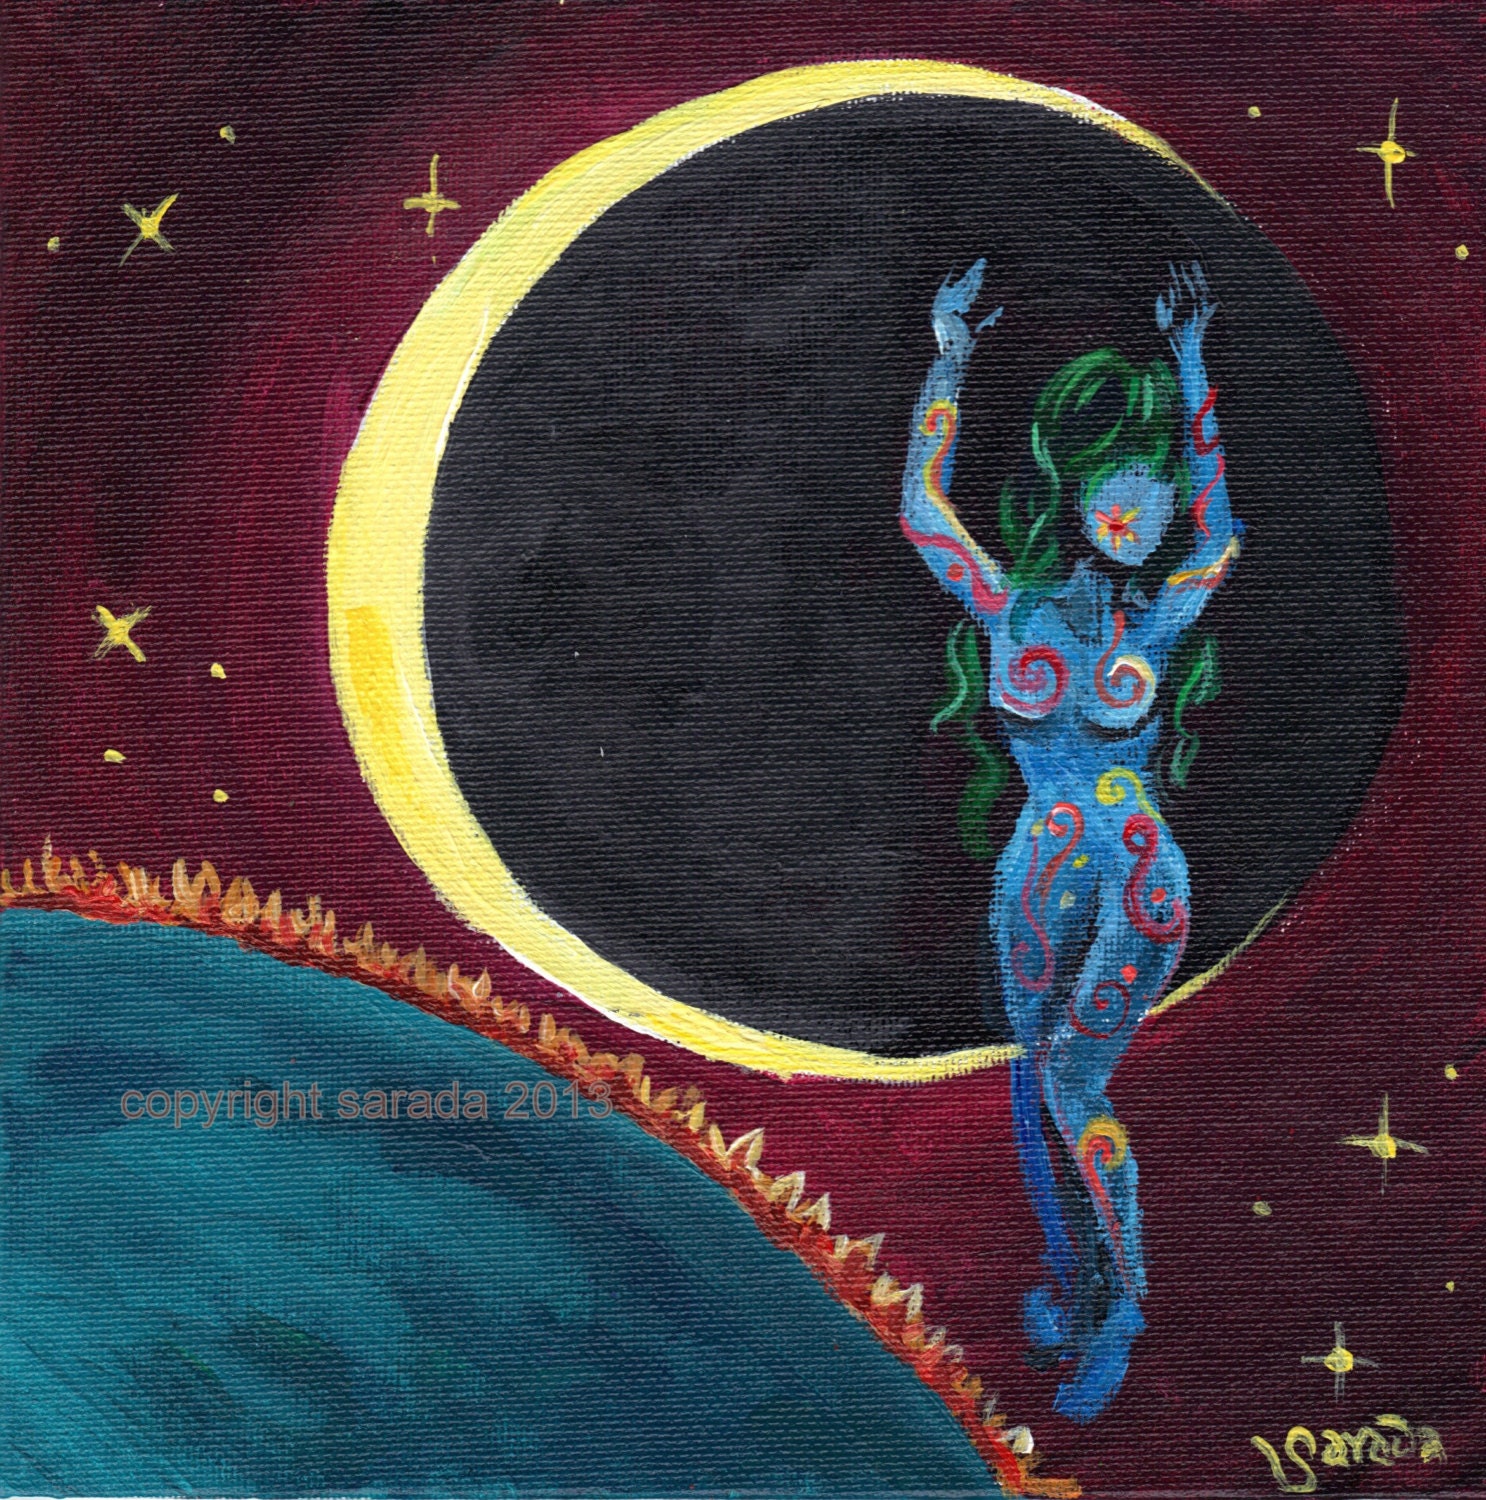 Psychedelic space girl original acrylic painting body paint